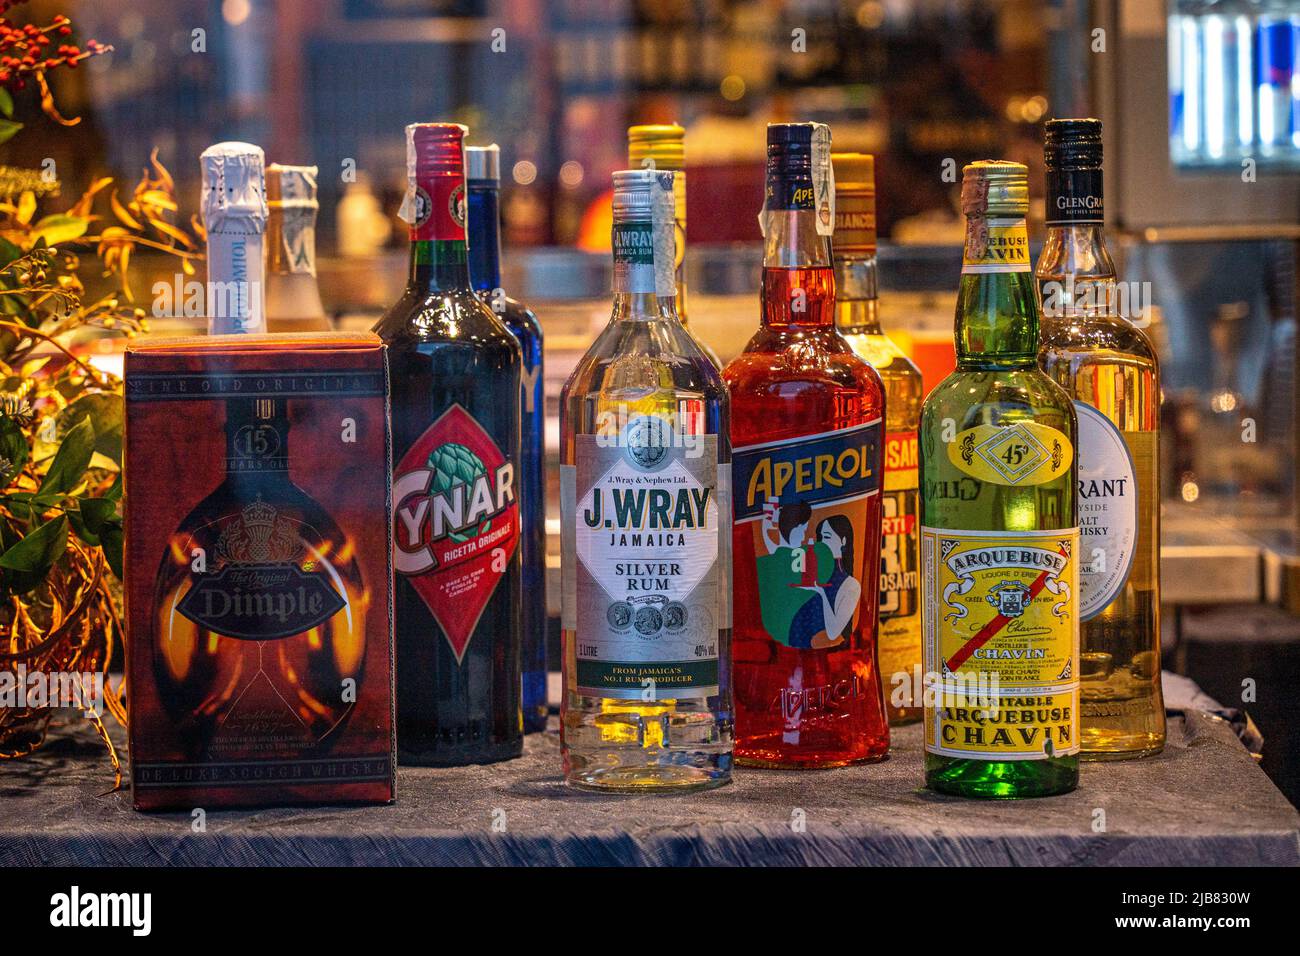 Venice, Italy - 18.02.2022: Bottles of assorted global hard liquor brands including whiskey, aperol, rum and chavin arquebuse Stock Photo